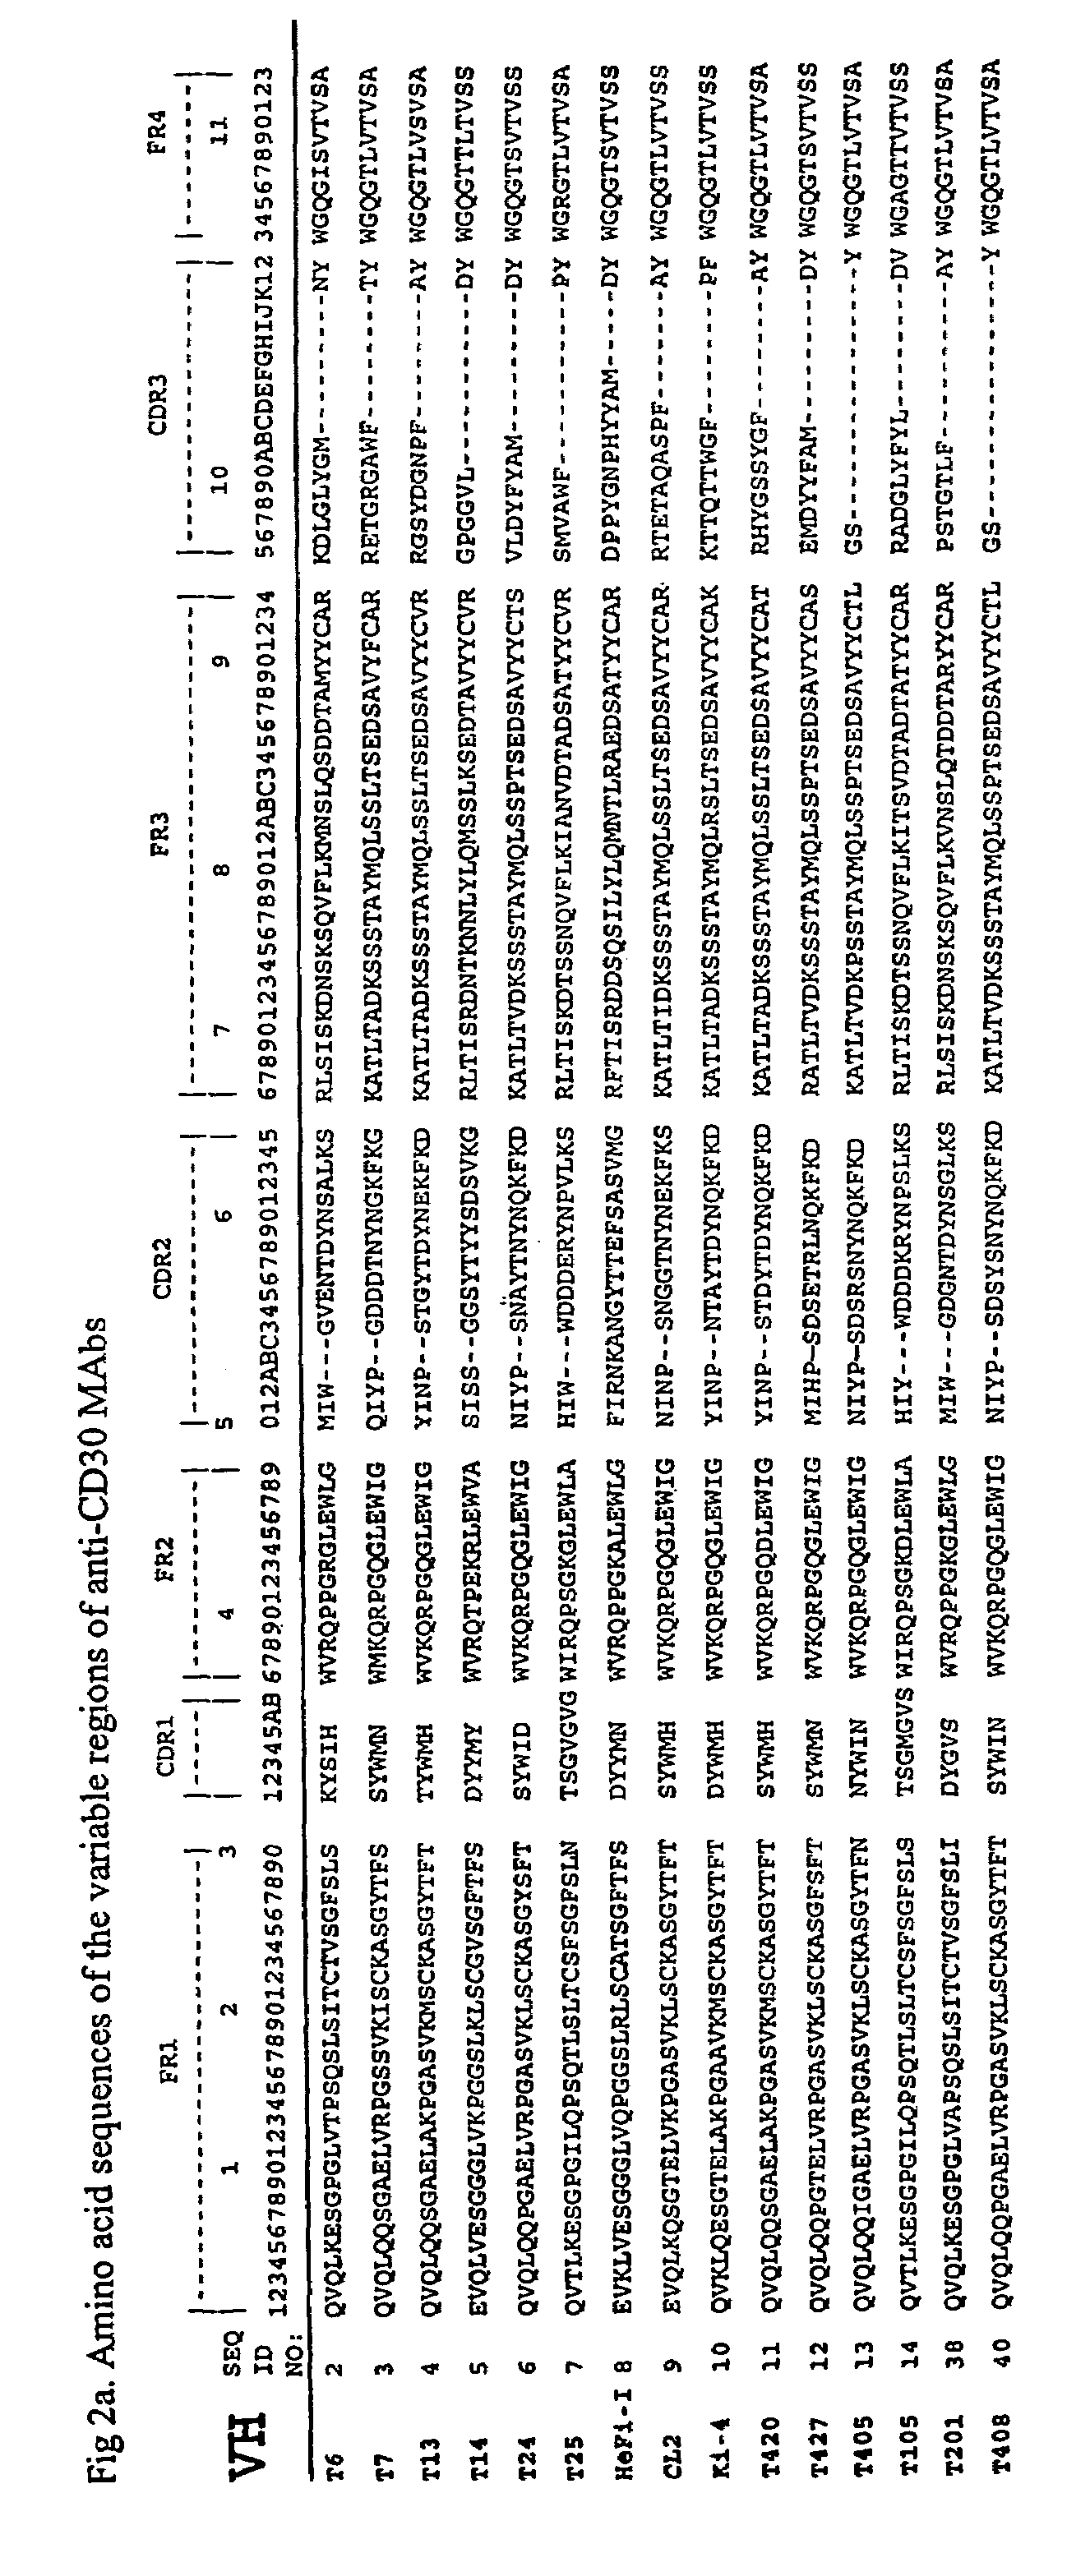 Anti-CD30 stalk and anti-CD30 antibodies suitable for use in immunotoxins